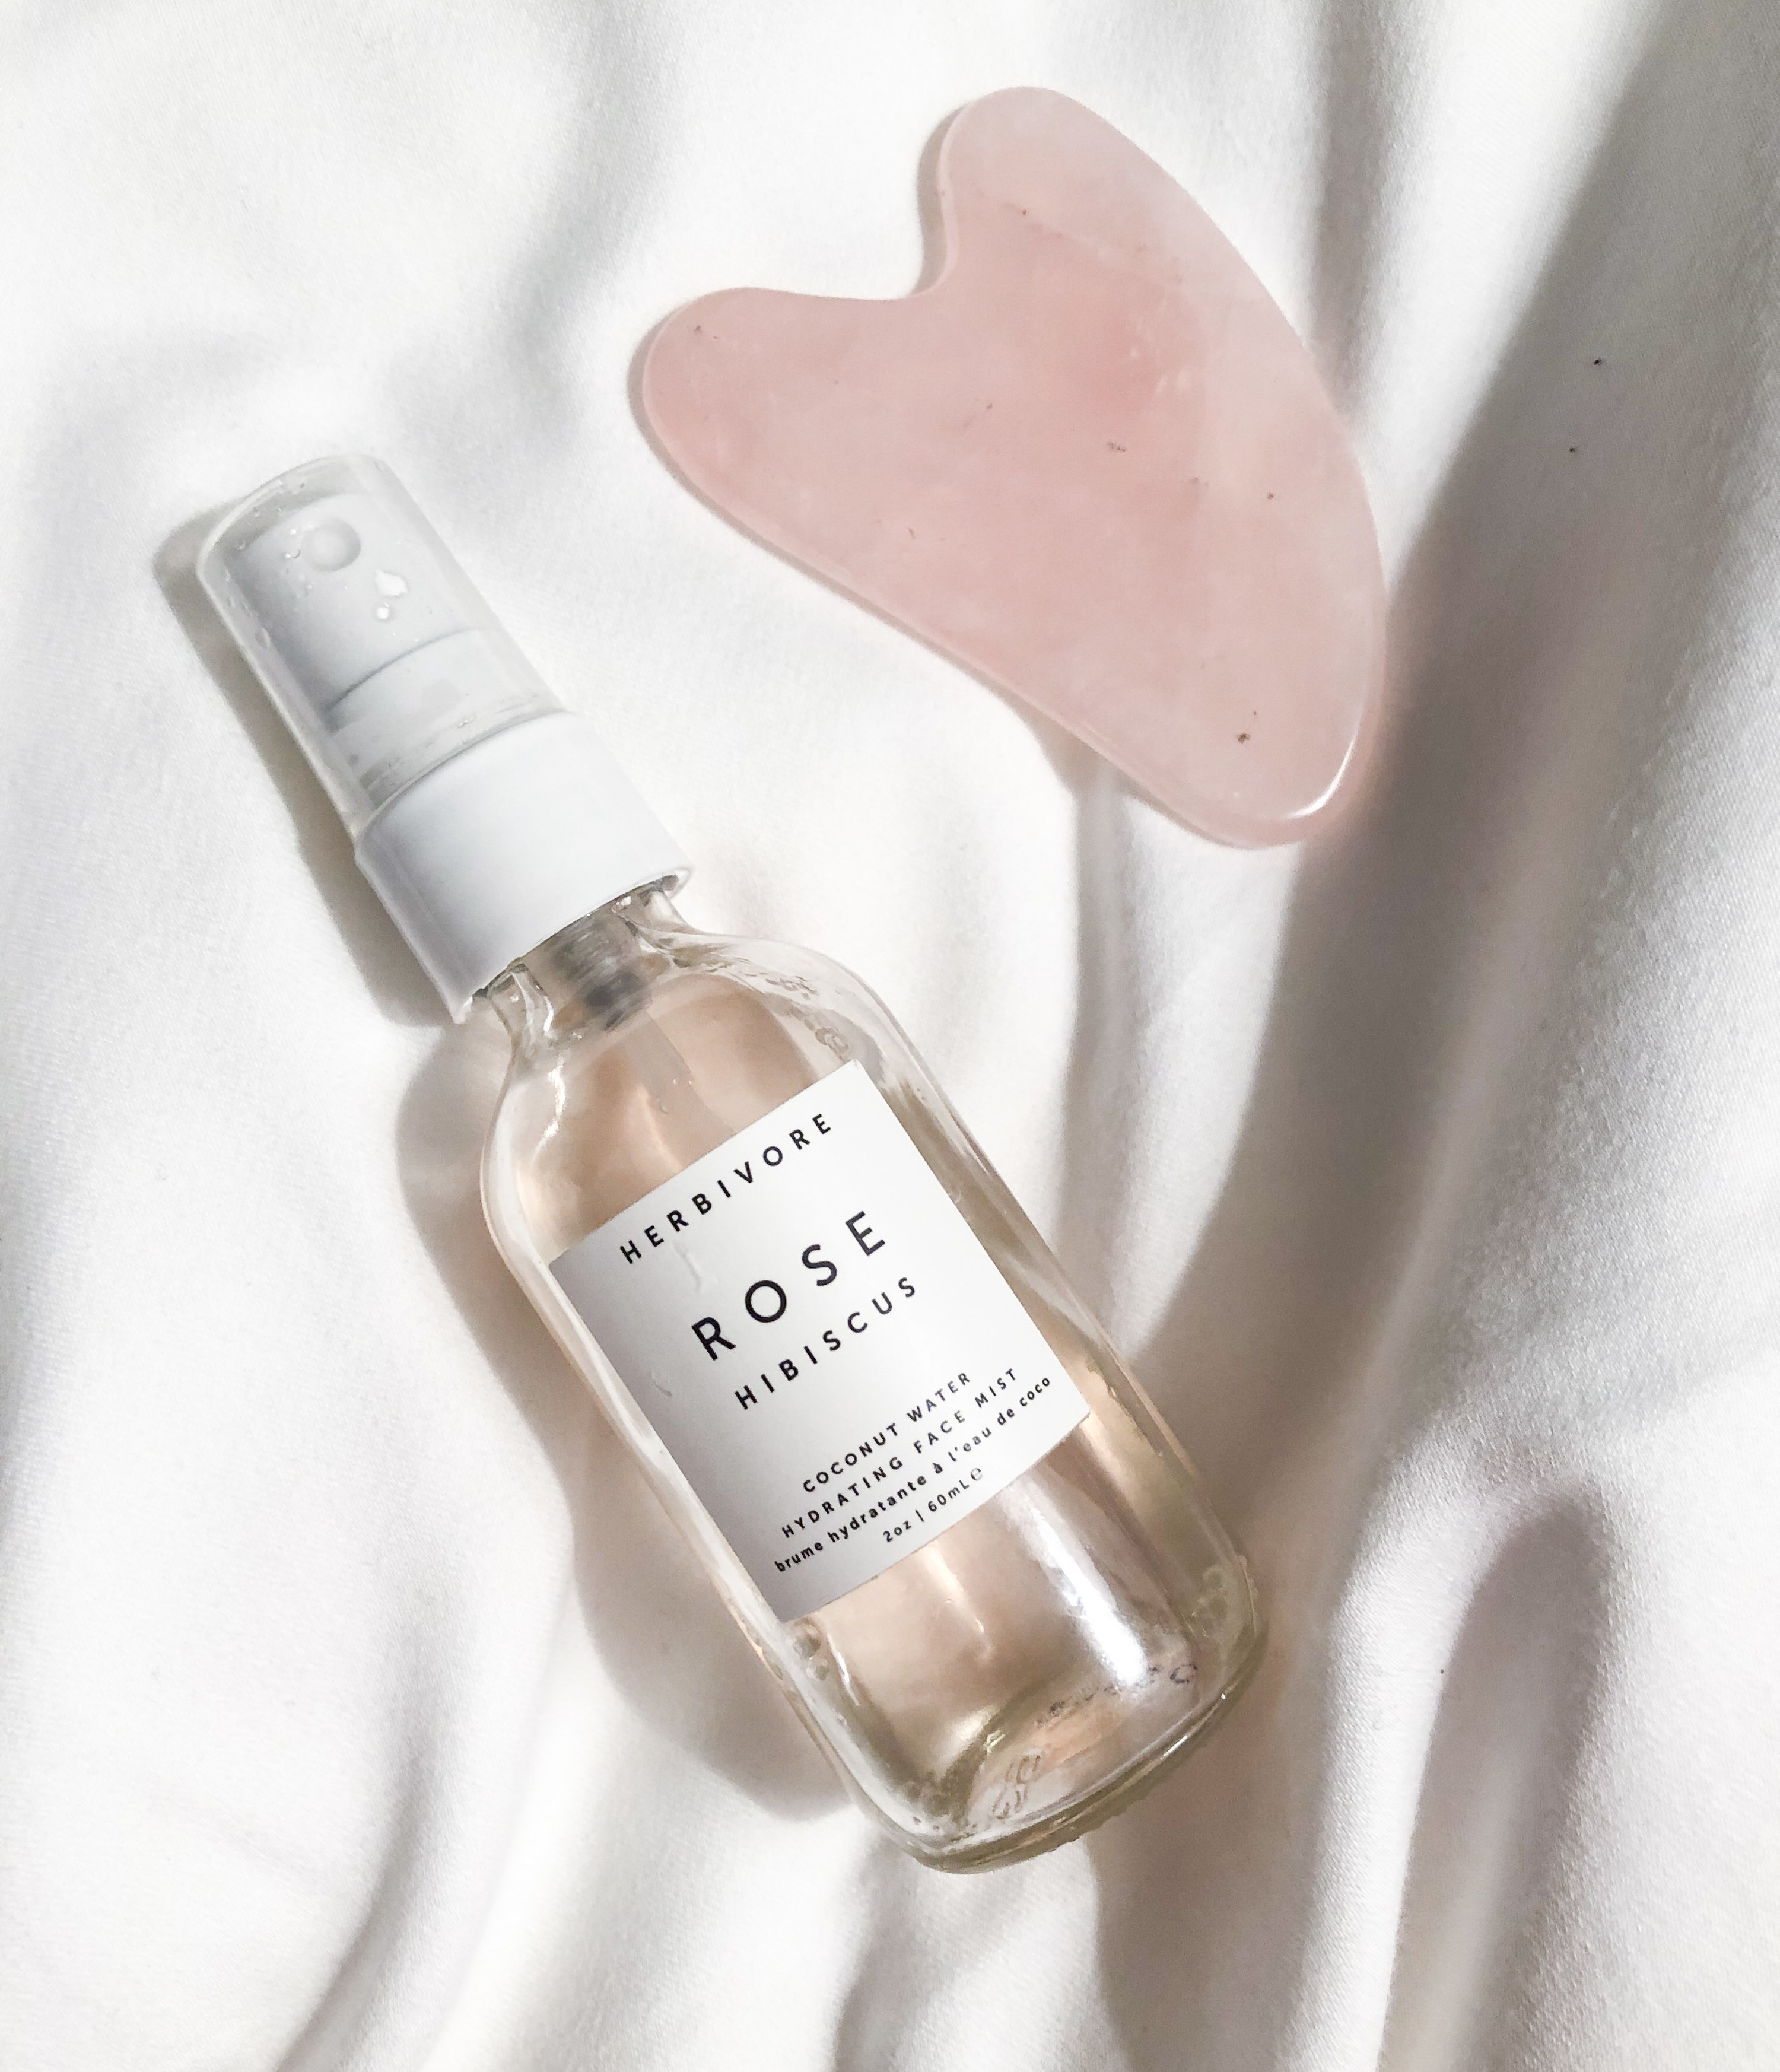 A flatlay of the face mist on clean sheets next to a rose quartz gua sha tool